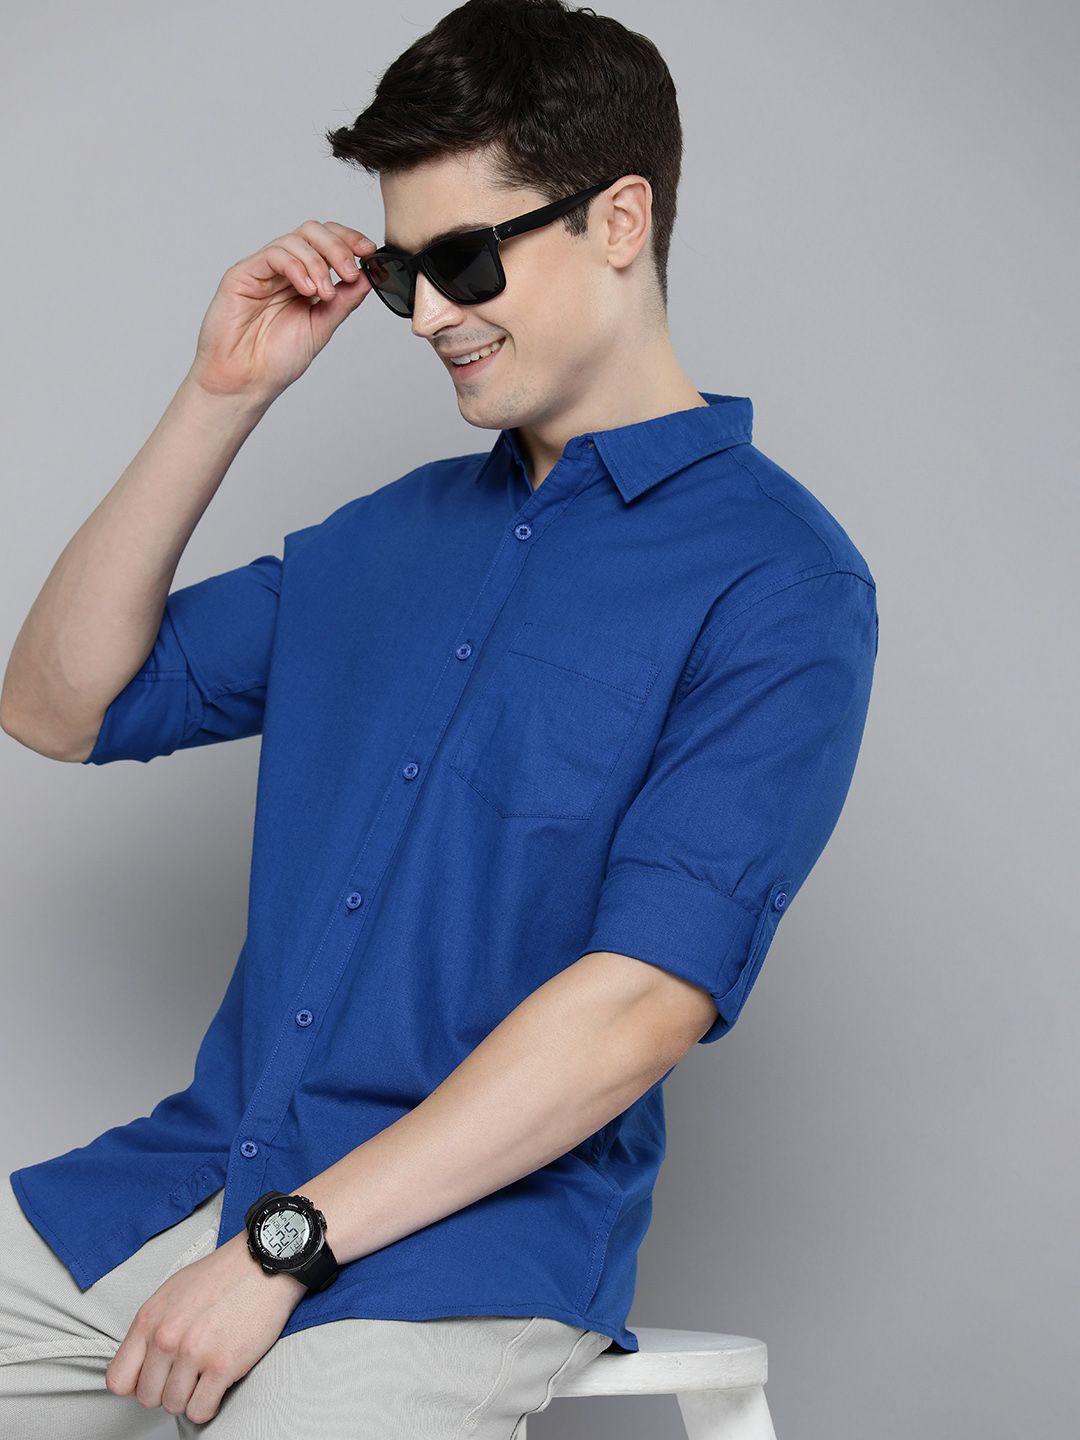 here&now men slim fit opaque casual shirt